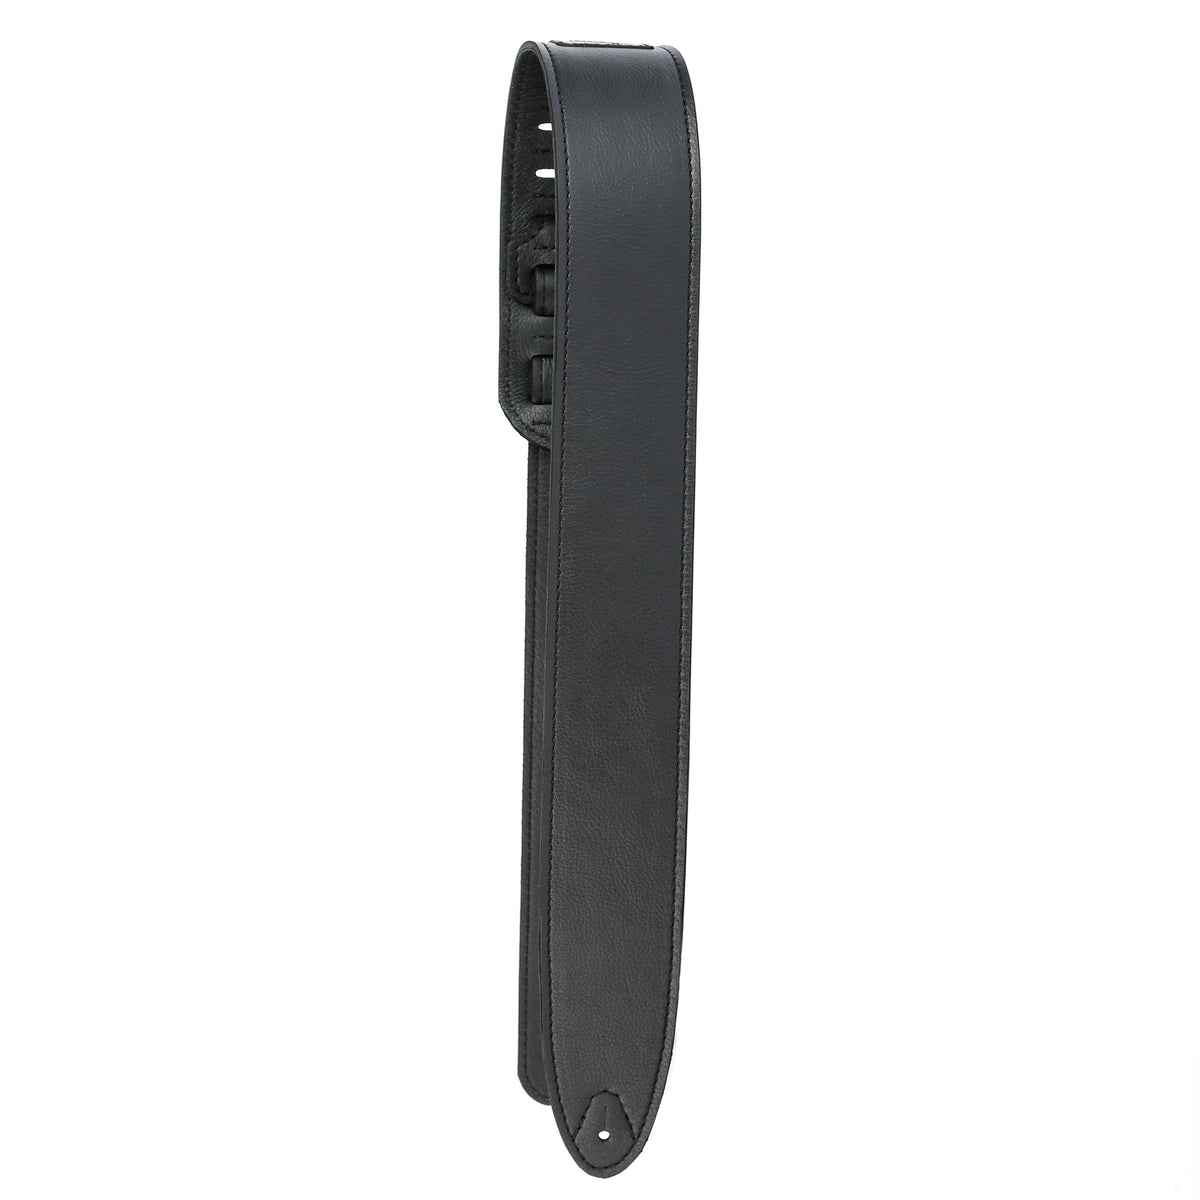 3-inch wide black leather guitar strap with a single stitched border